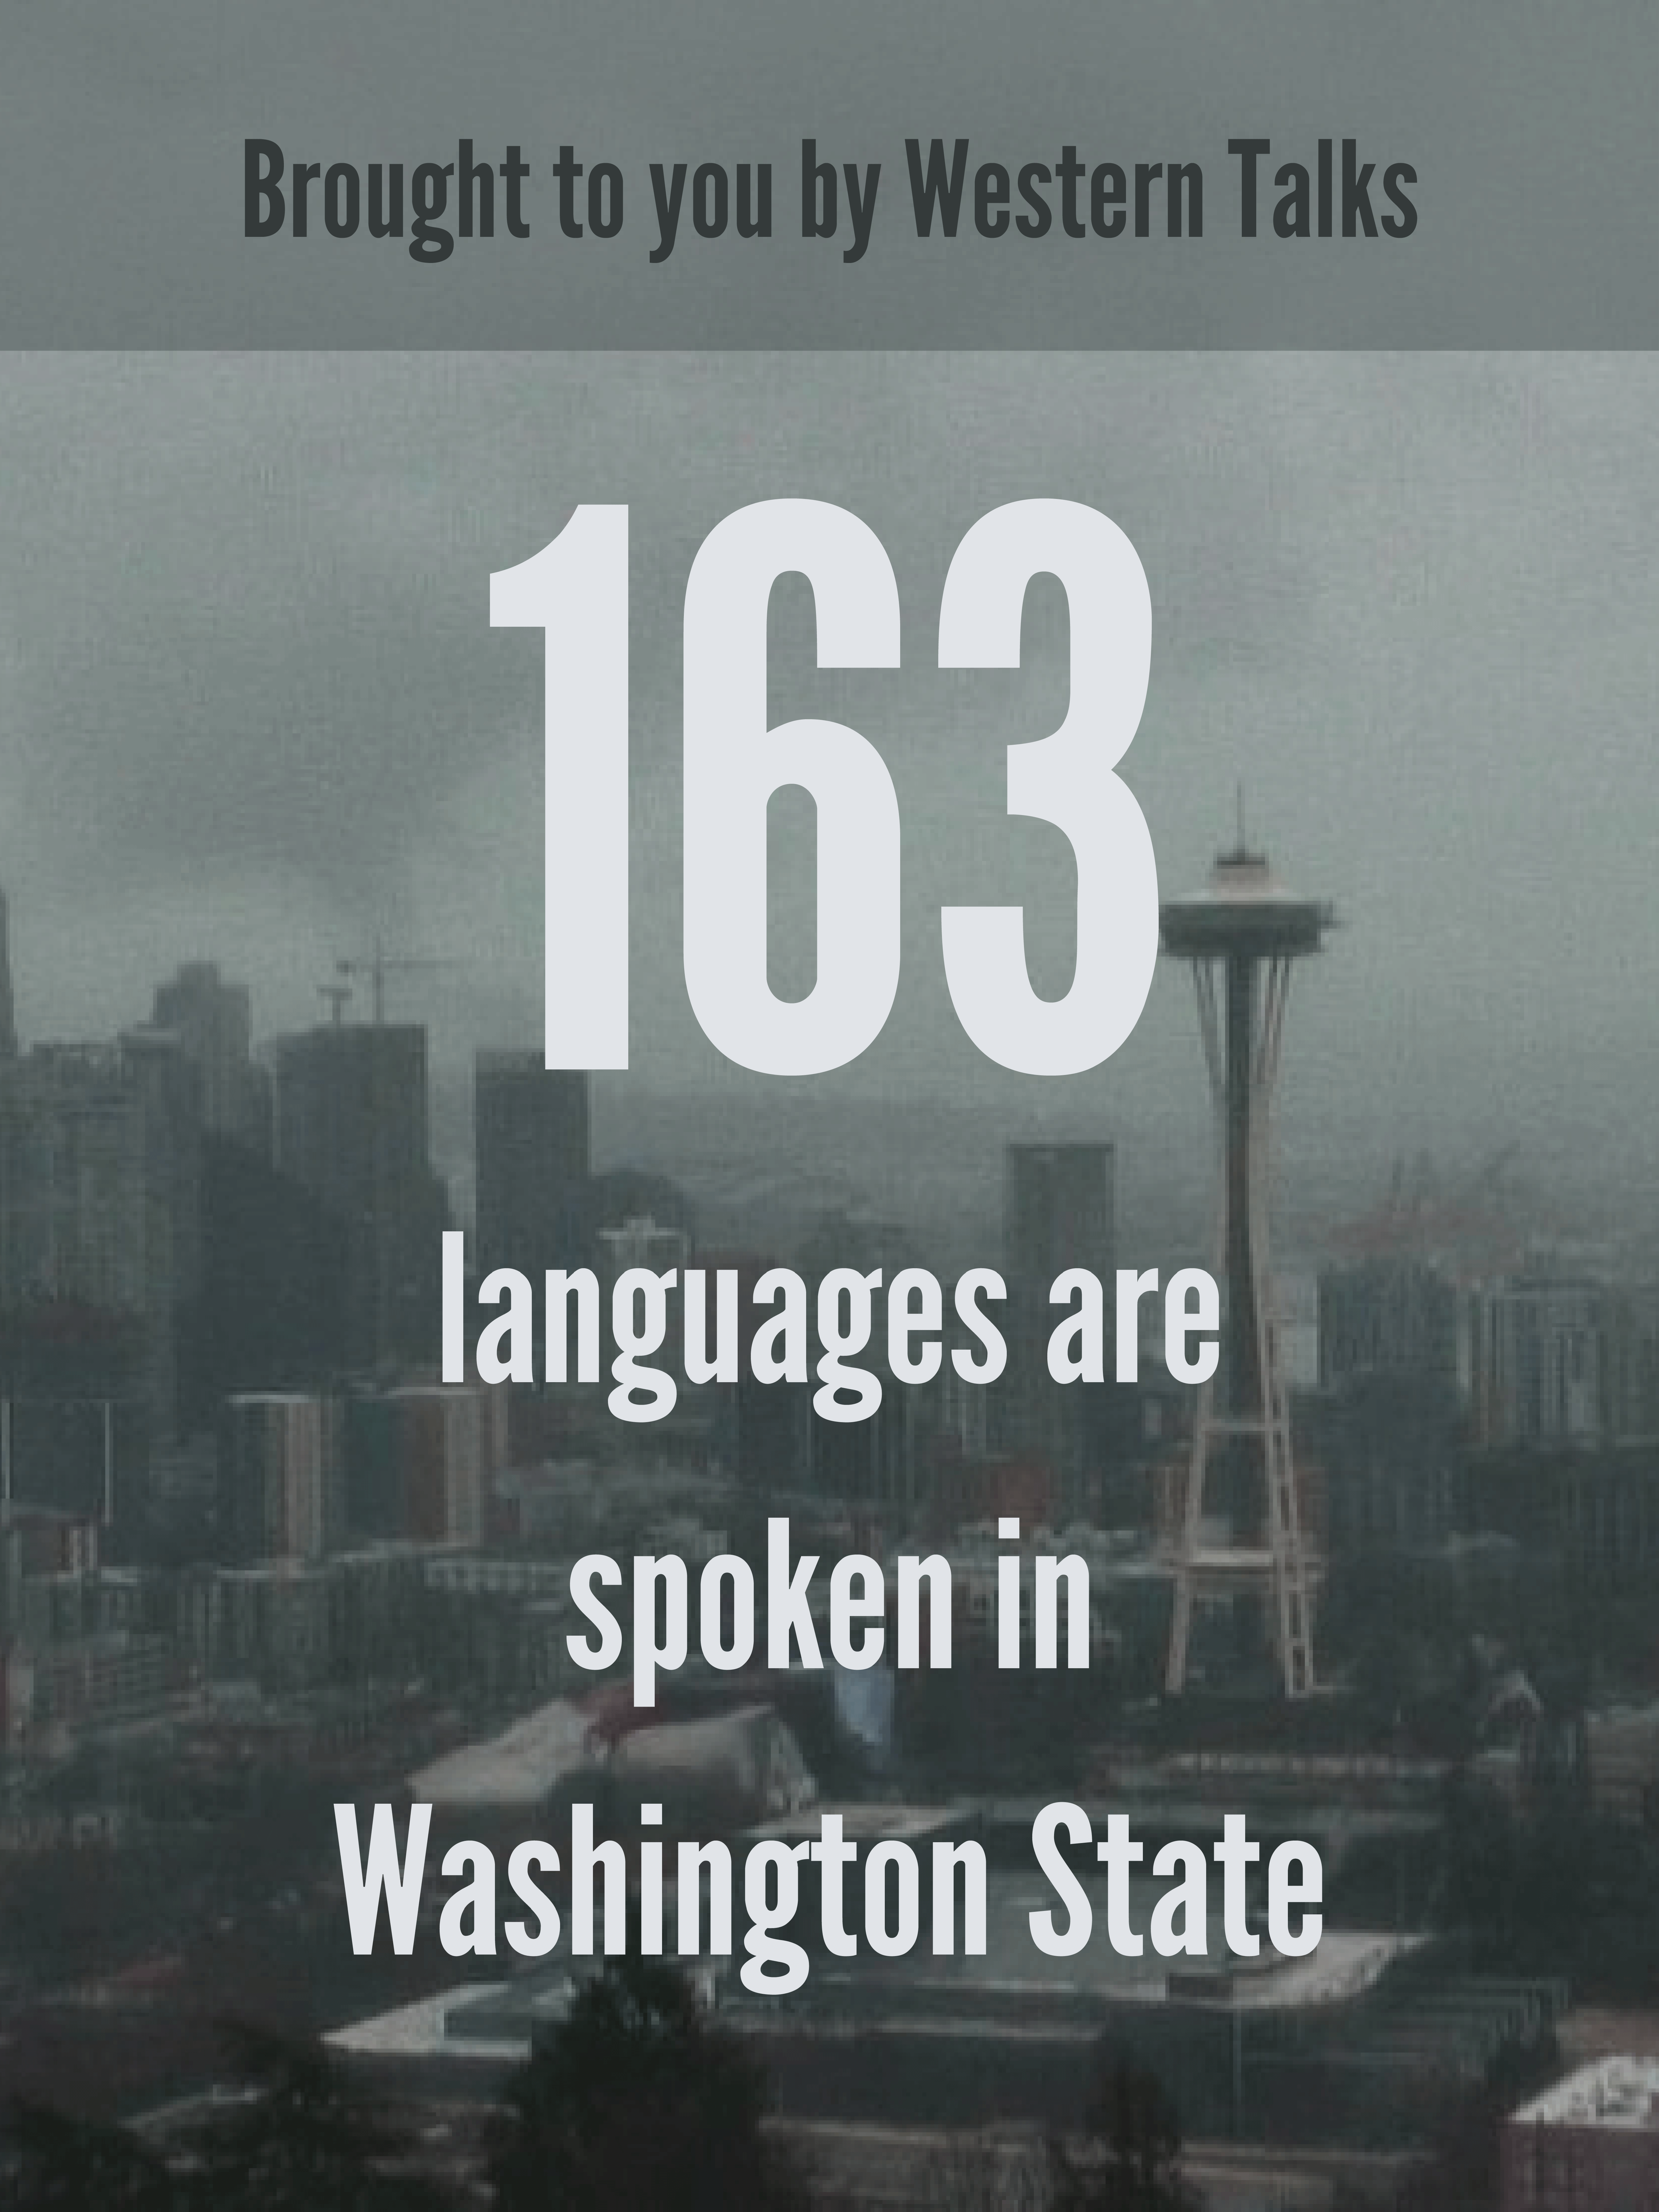 Linguistics Posters. 163 languages are spoken in Washington State